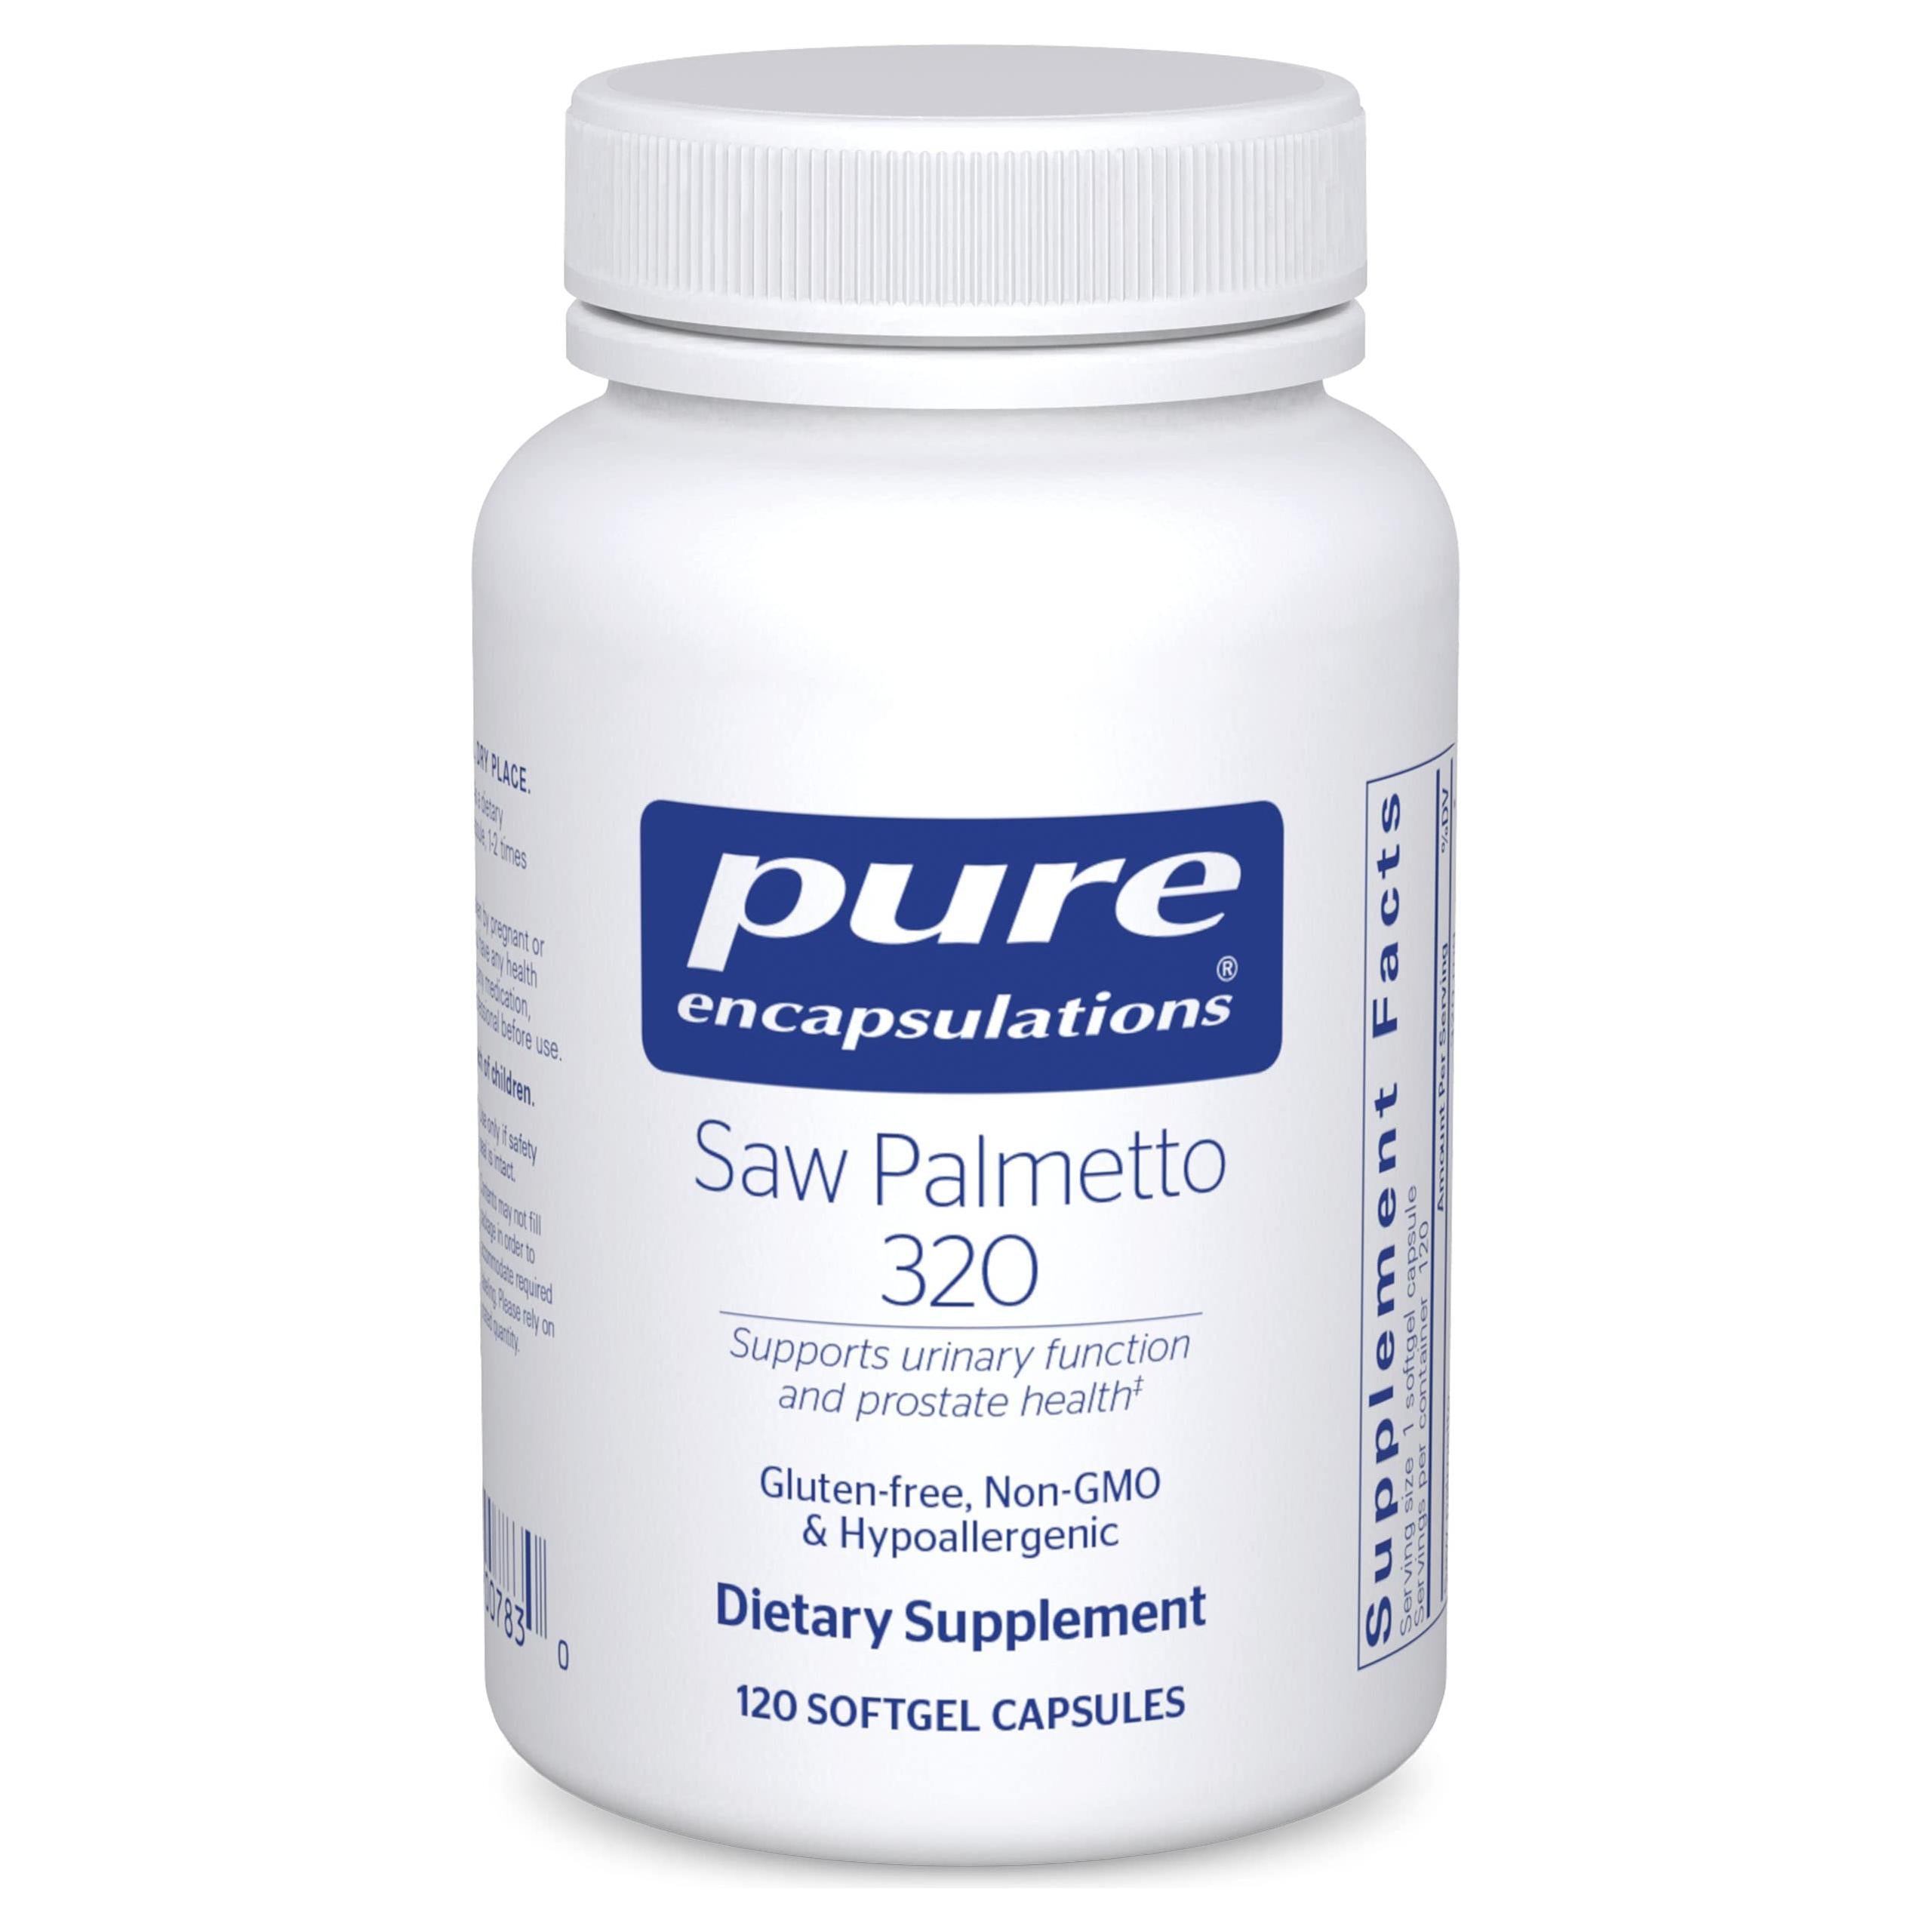 Pure Encapsulations Saw Palmetto 320 - Fatty Acids &amp; Other Essential Nutrients to Support Metabolism &amp; Urinary Function - with Saw Palmetto Extract - 120 Softgel Capsules